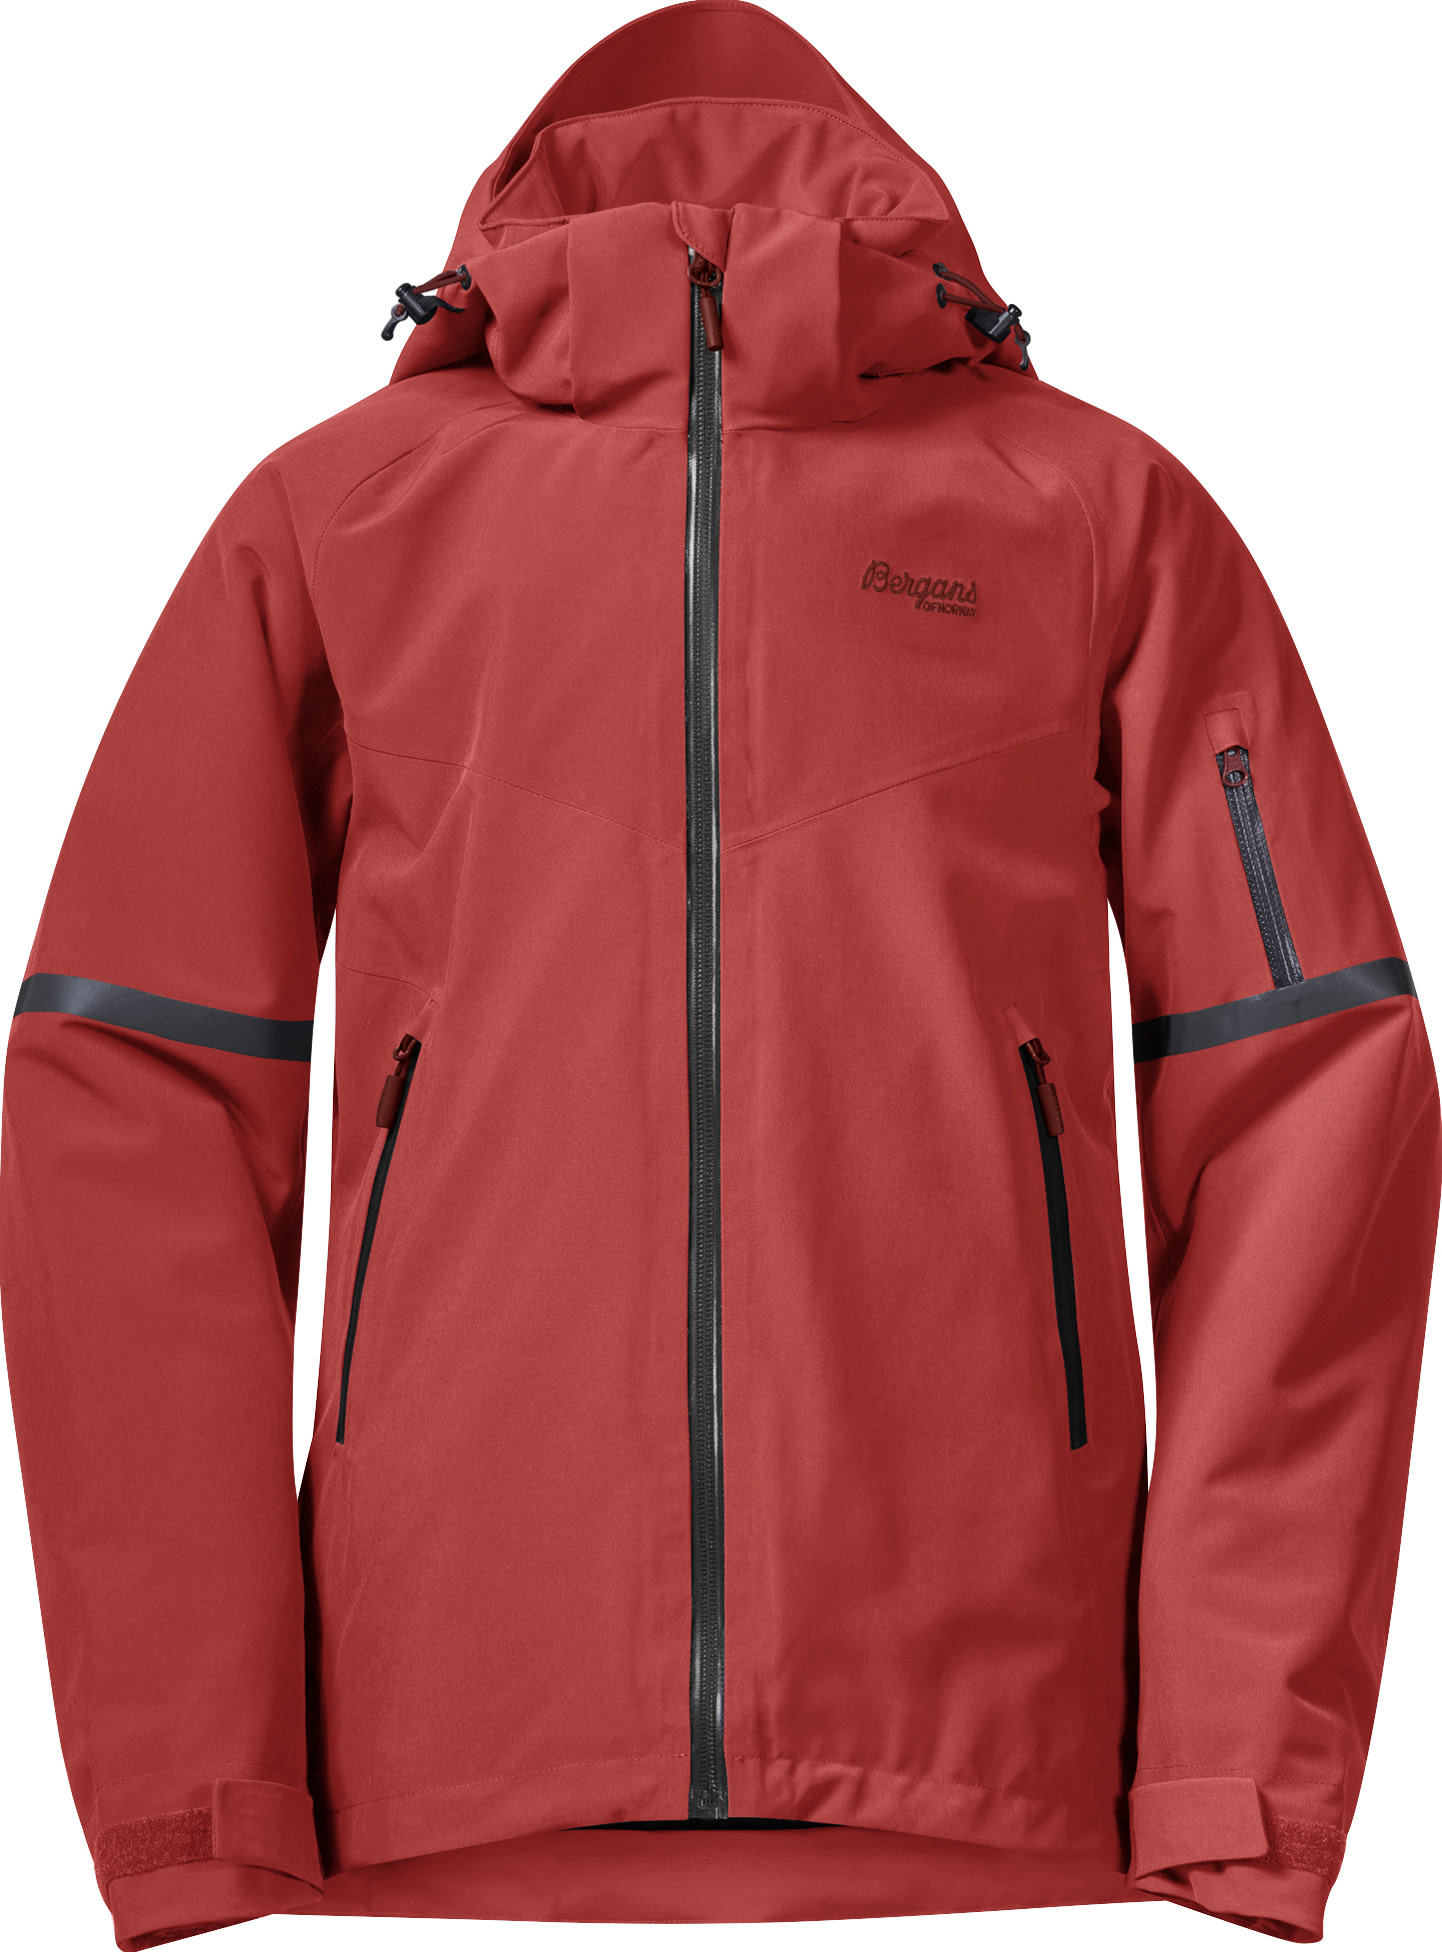 Girls’ Oppdal Insulated Youth Jacket Rusty Dust